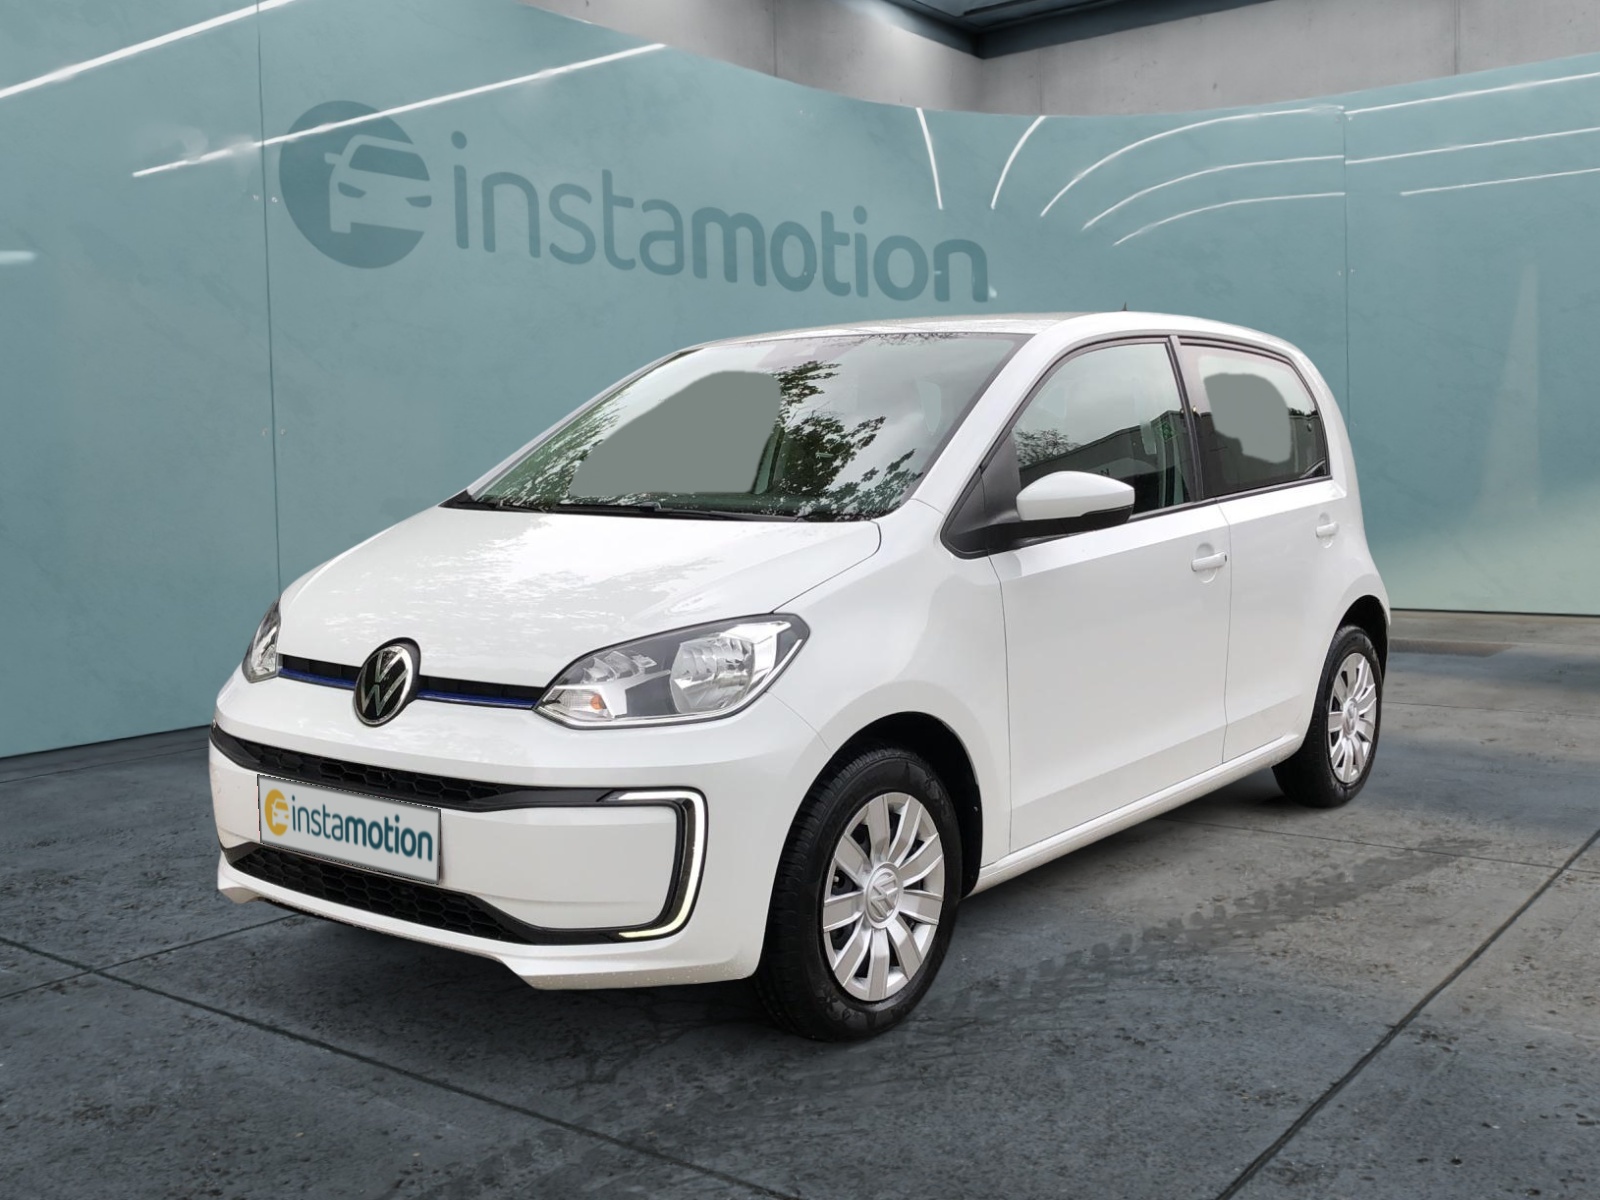 Volkswagen up e-up move up MAPS MORE